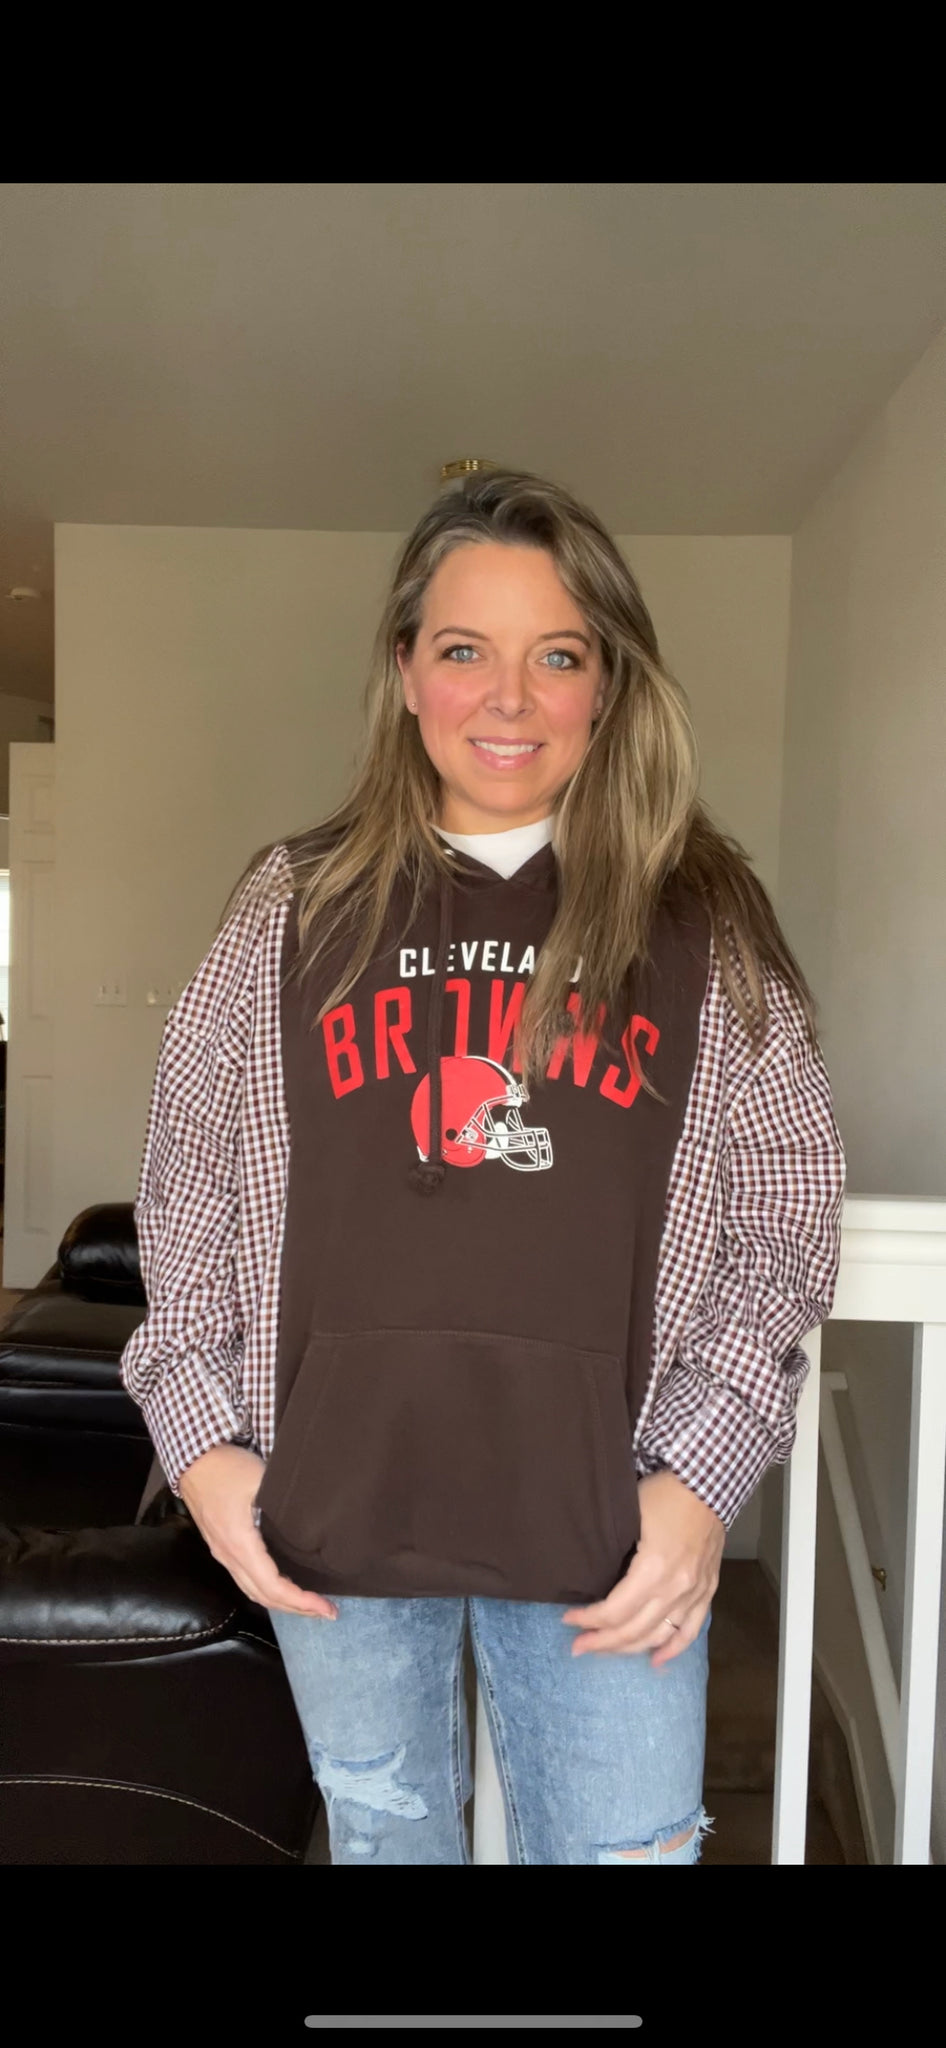 Cleveland Browns Upcycled Sweatshirt